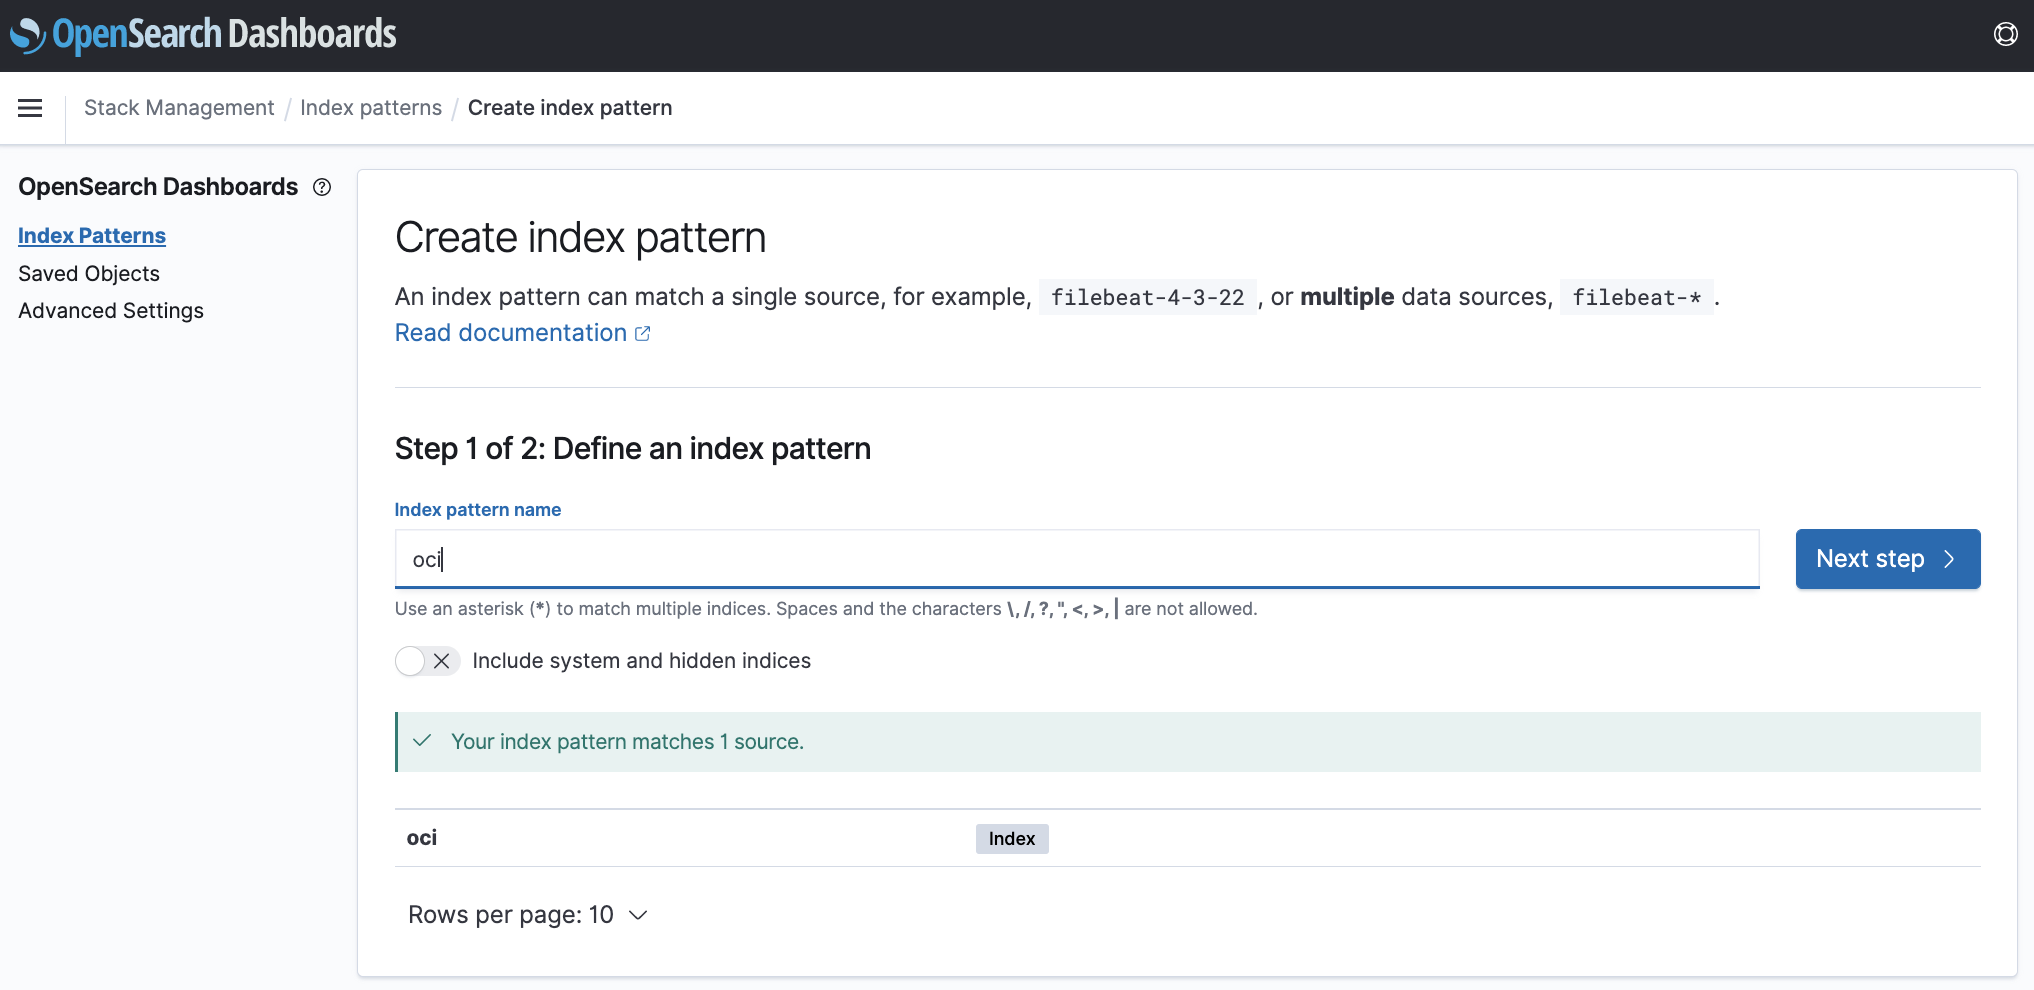 OpenSearch Dashboards - Create index pattern